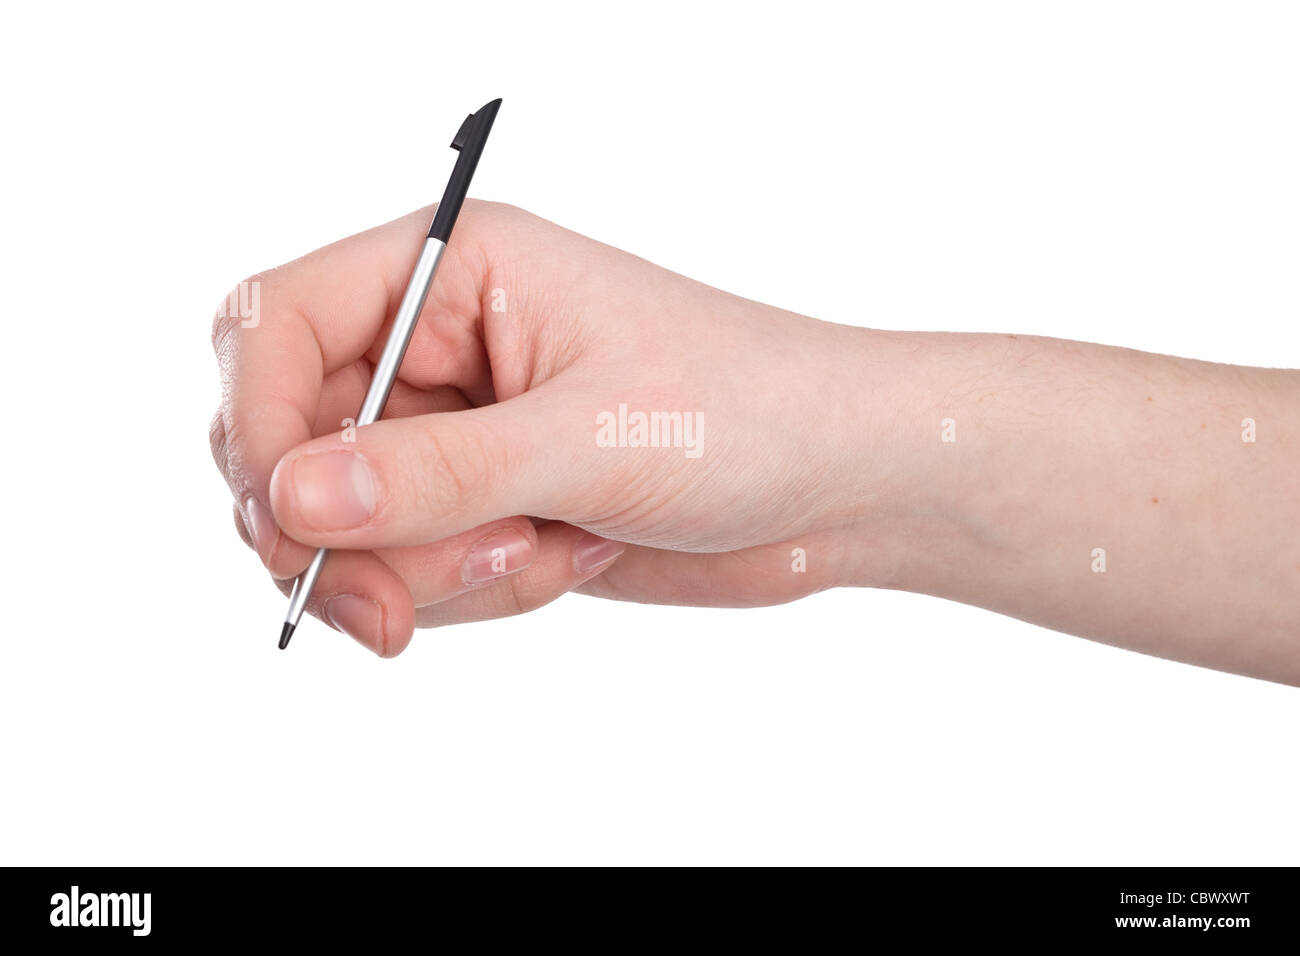 pda stylus in hand isolated on white background Stock Photo